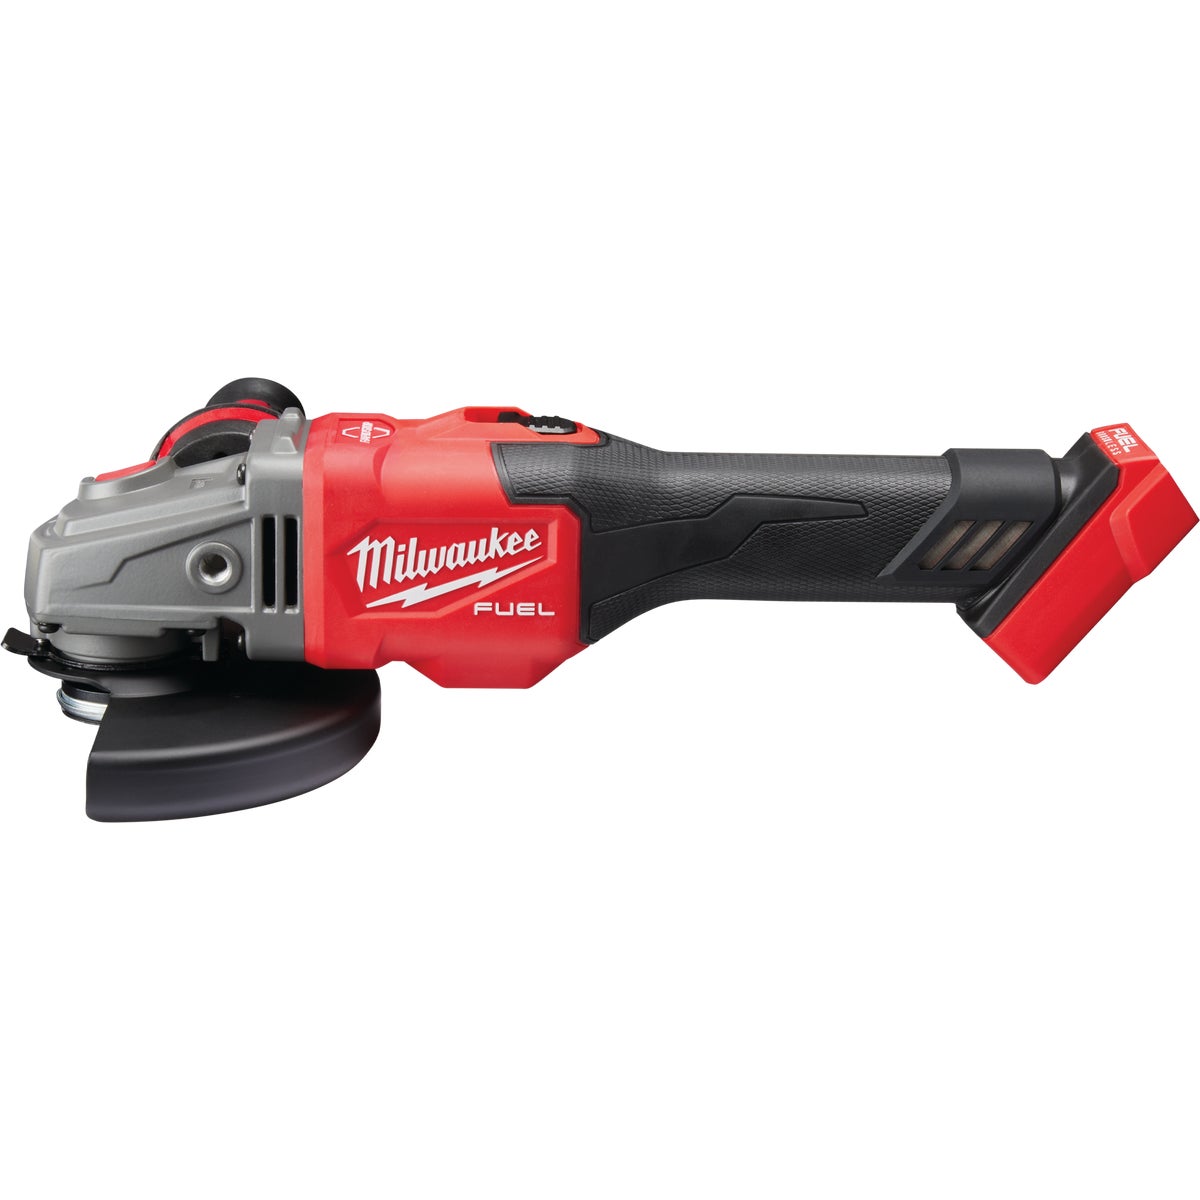 Milwaukee M18 FUEL Lithium-Ion 4-1/2 In. - 6 In. Brushless Braking Cordless Angle Grinder with Paddle Switch, No Lock (Tool Only)